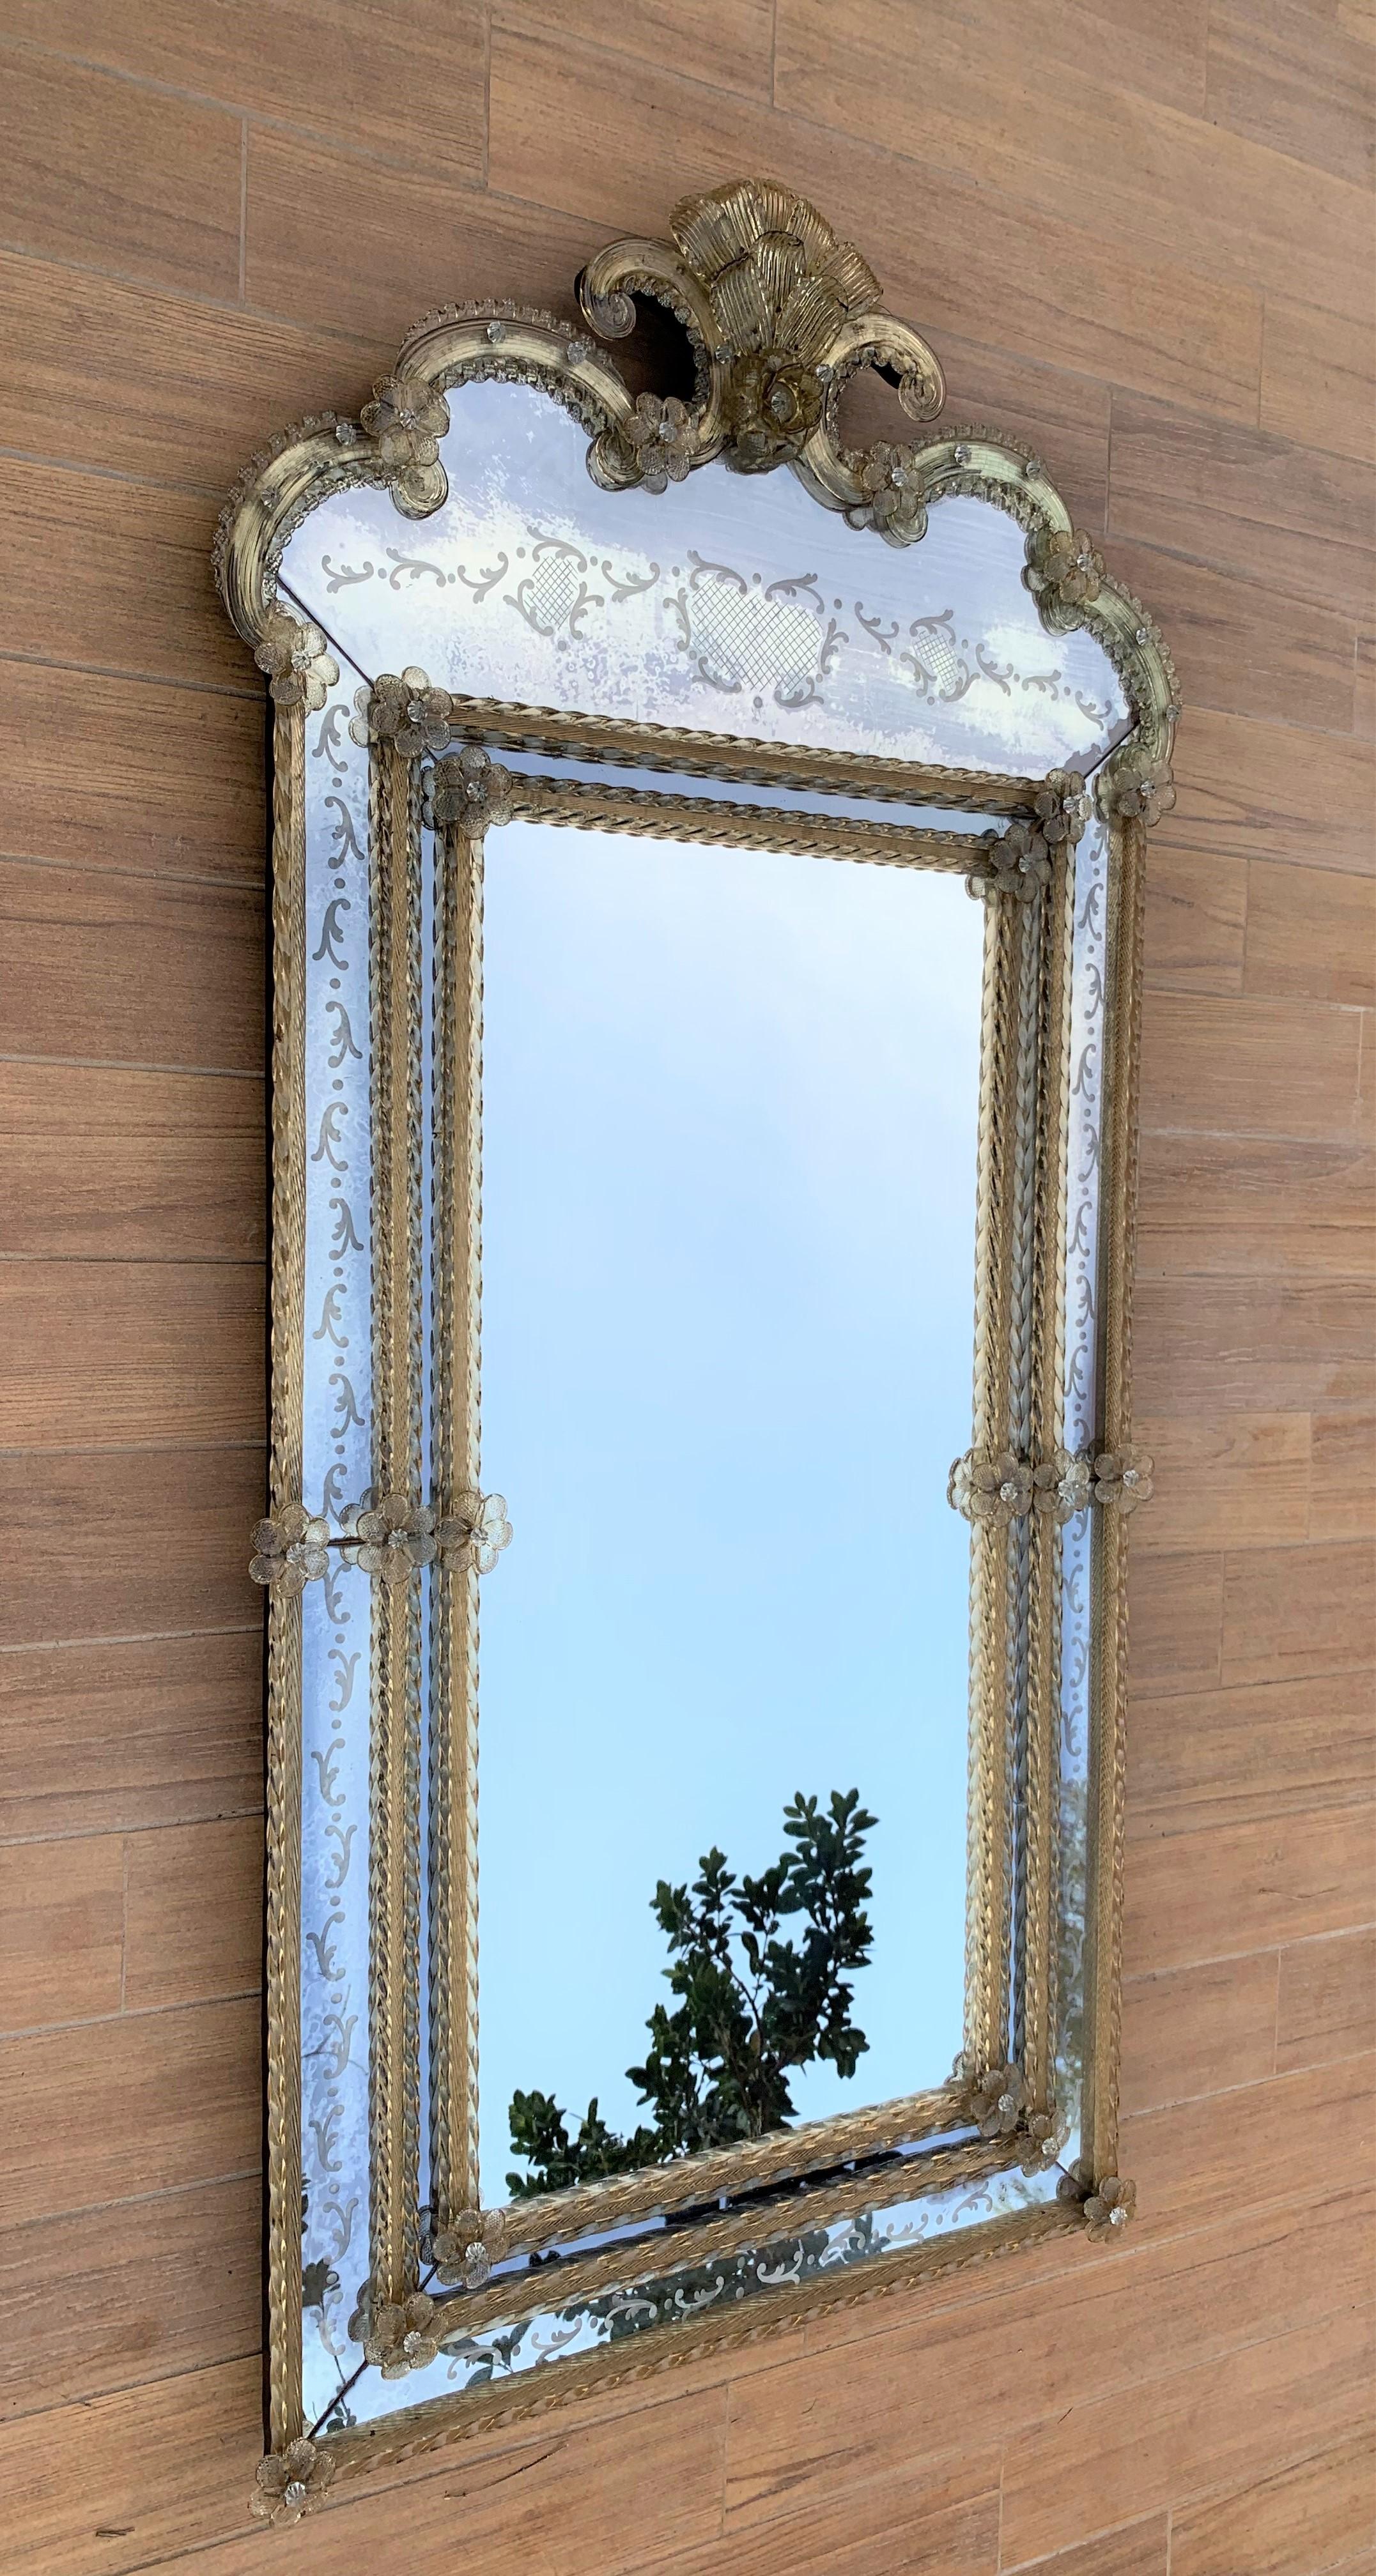 The crest top Venetian mirror. With its beveled panels and carved crest topped with a lovely lotus flower-like motif, the crest top mirror has been handmade and hand silvered. The central panel shows a light antiquing finish while the surround has a